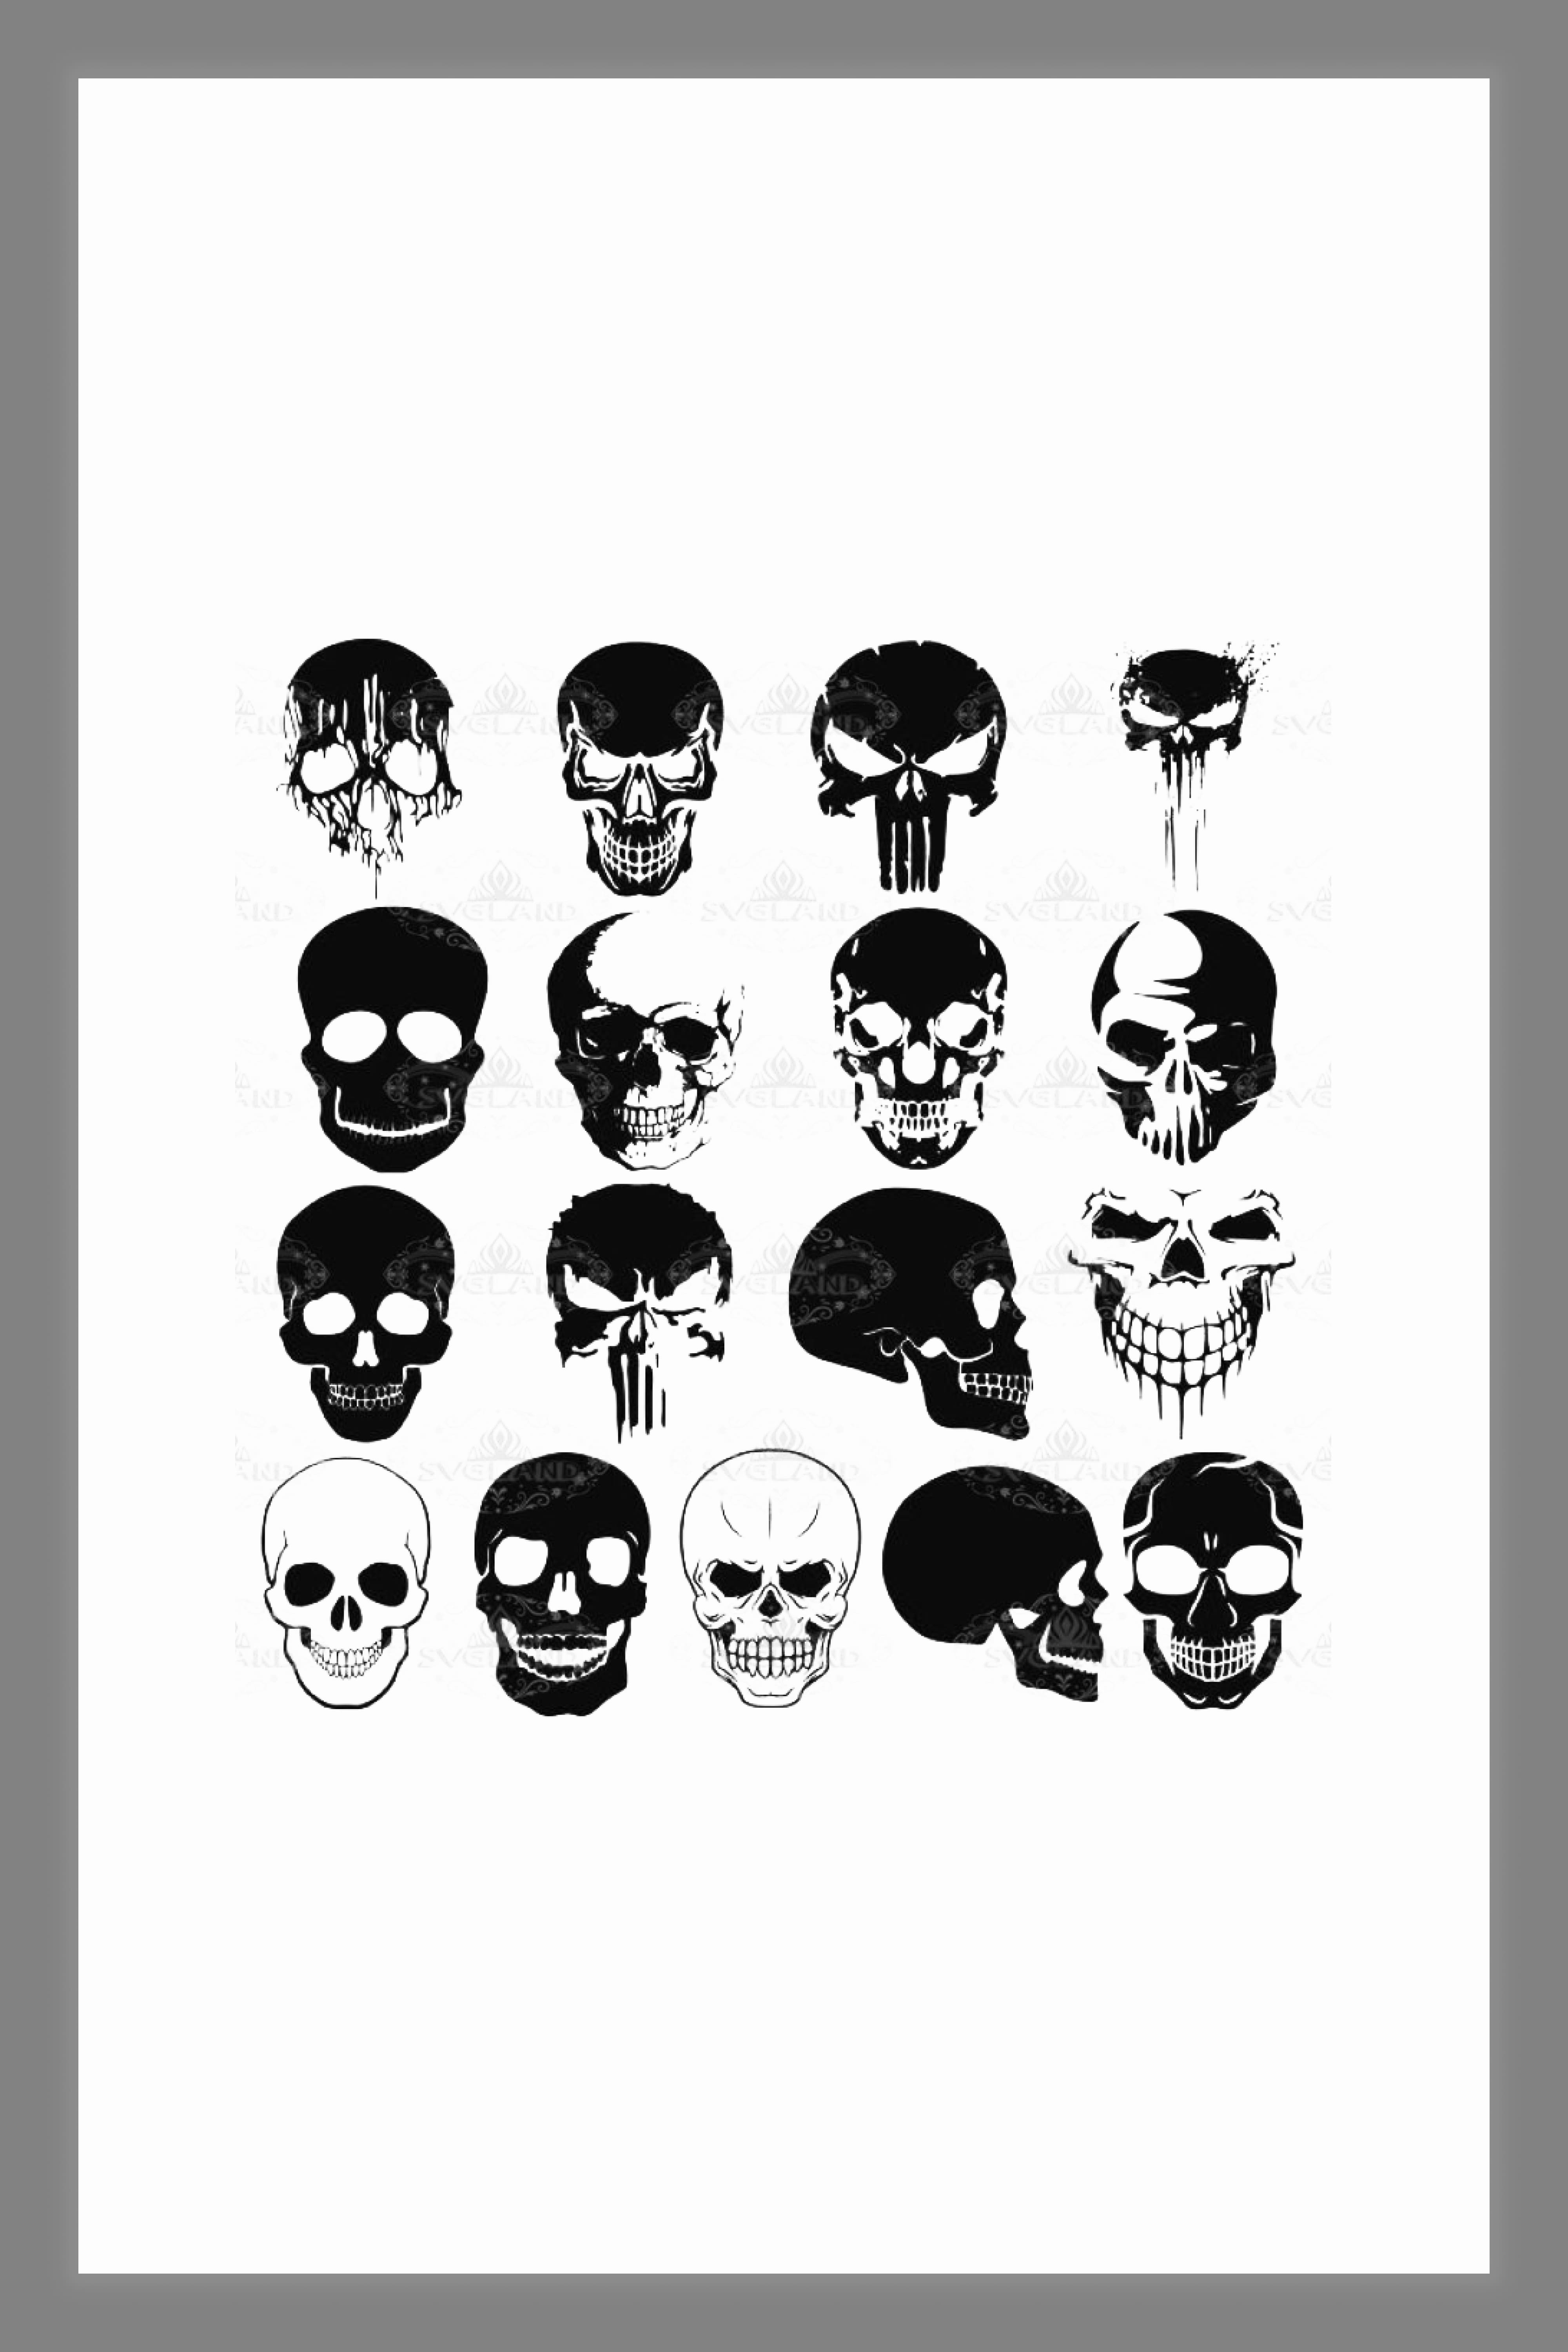 Collage of various skull images.